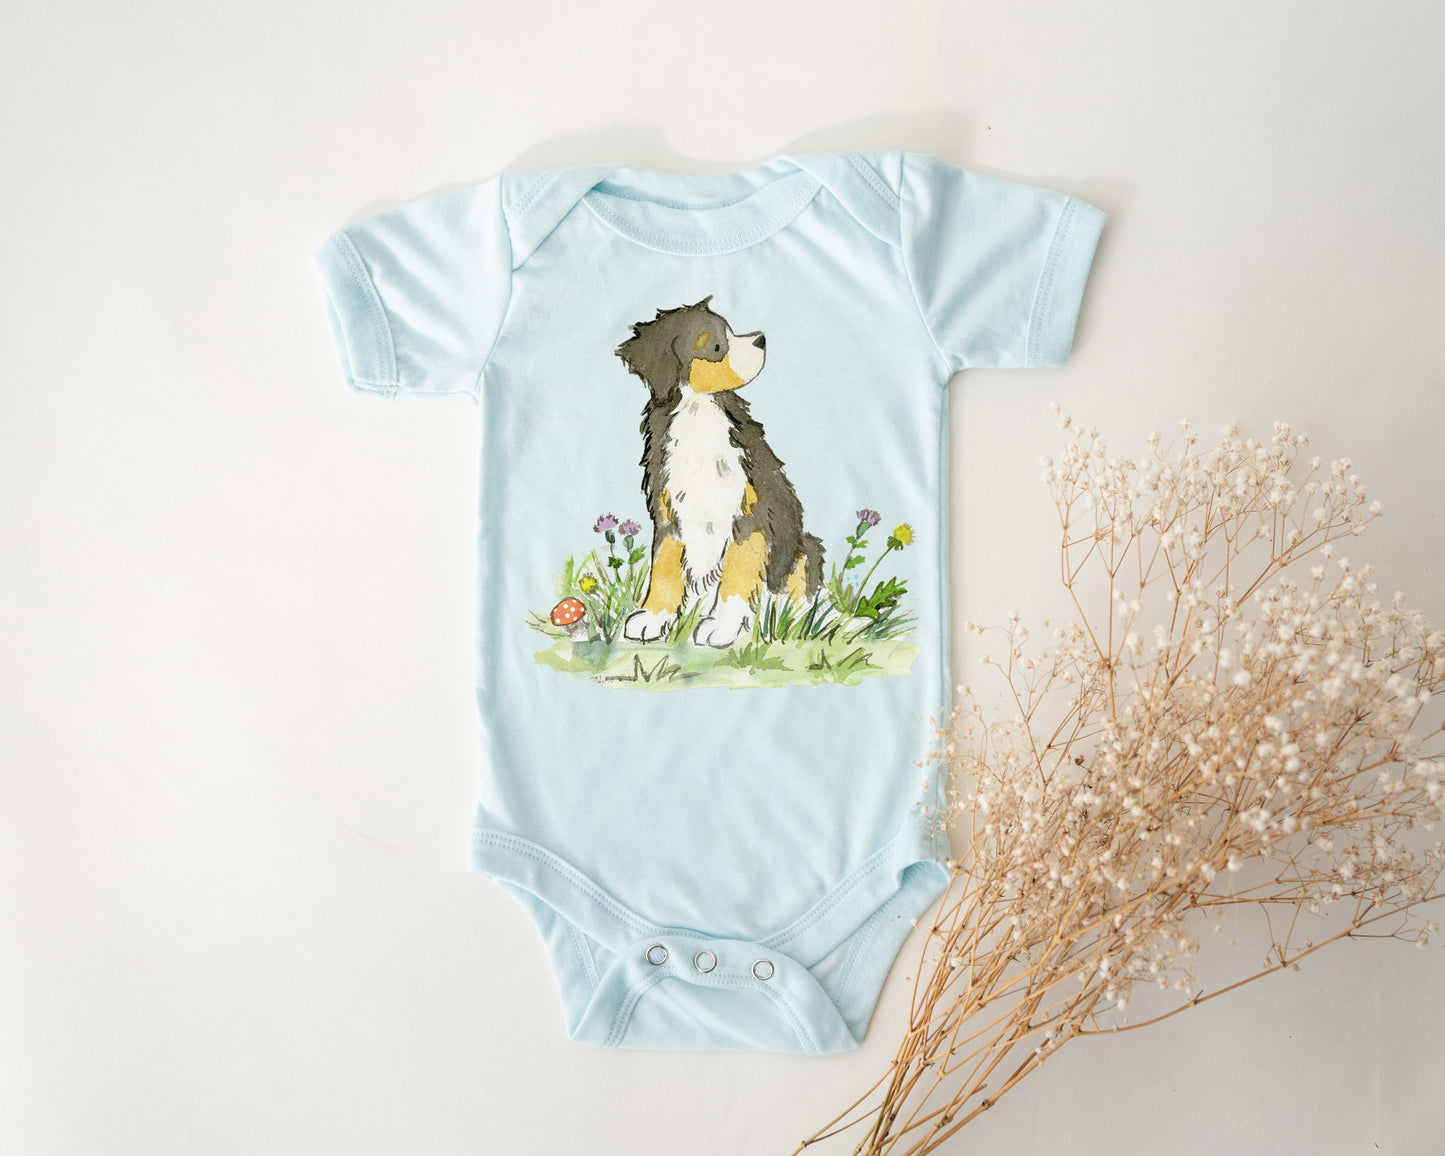 Light Blue colored infant bodysuit with artwork of a cute Bernese Mountain Dog on it.